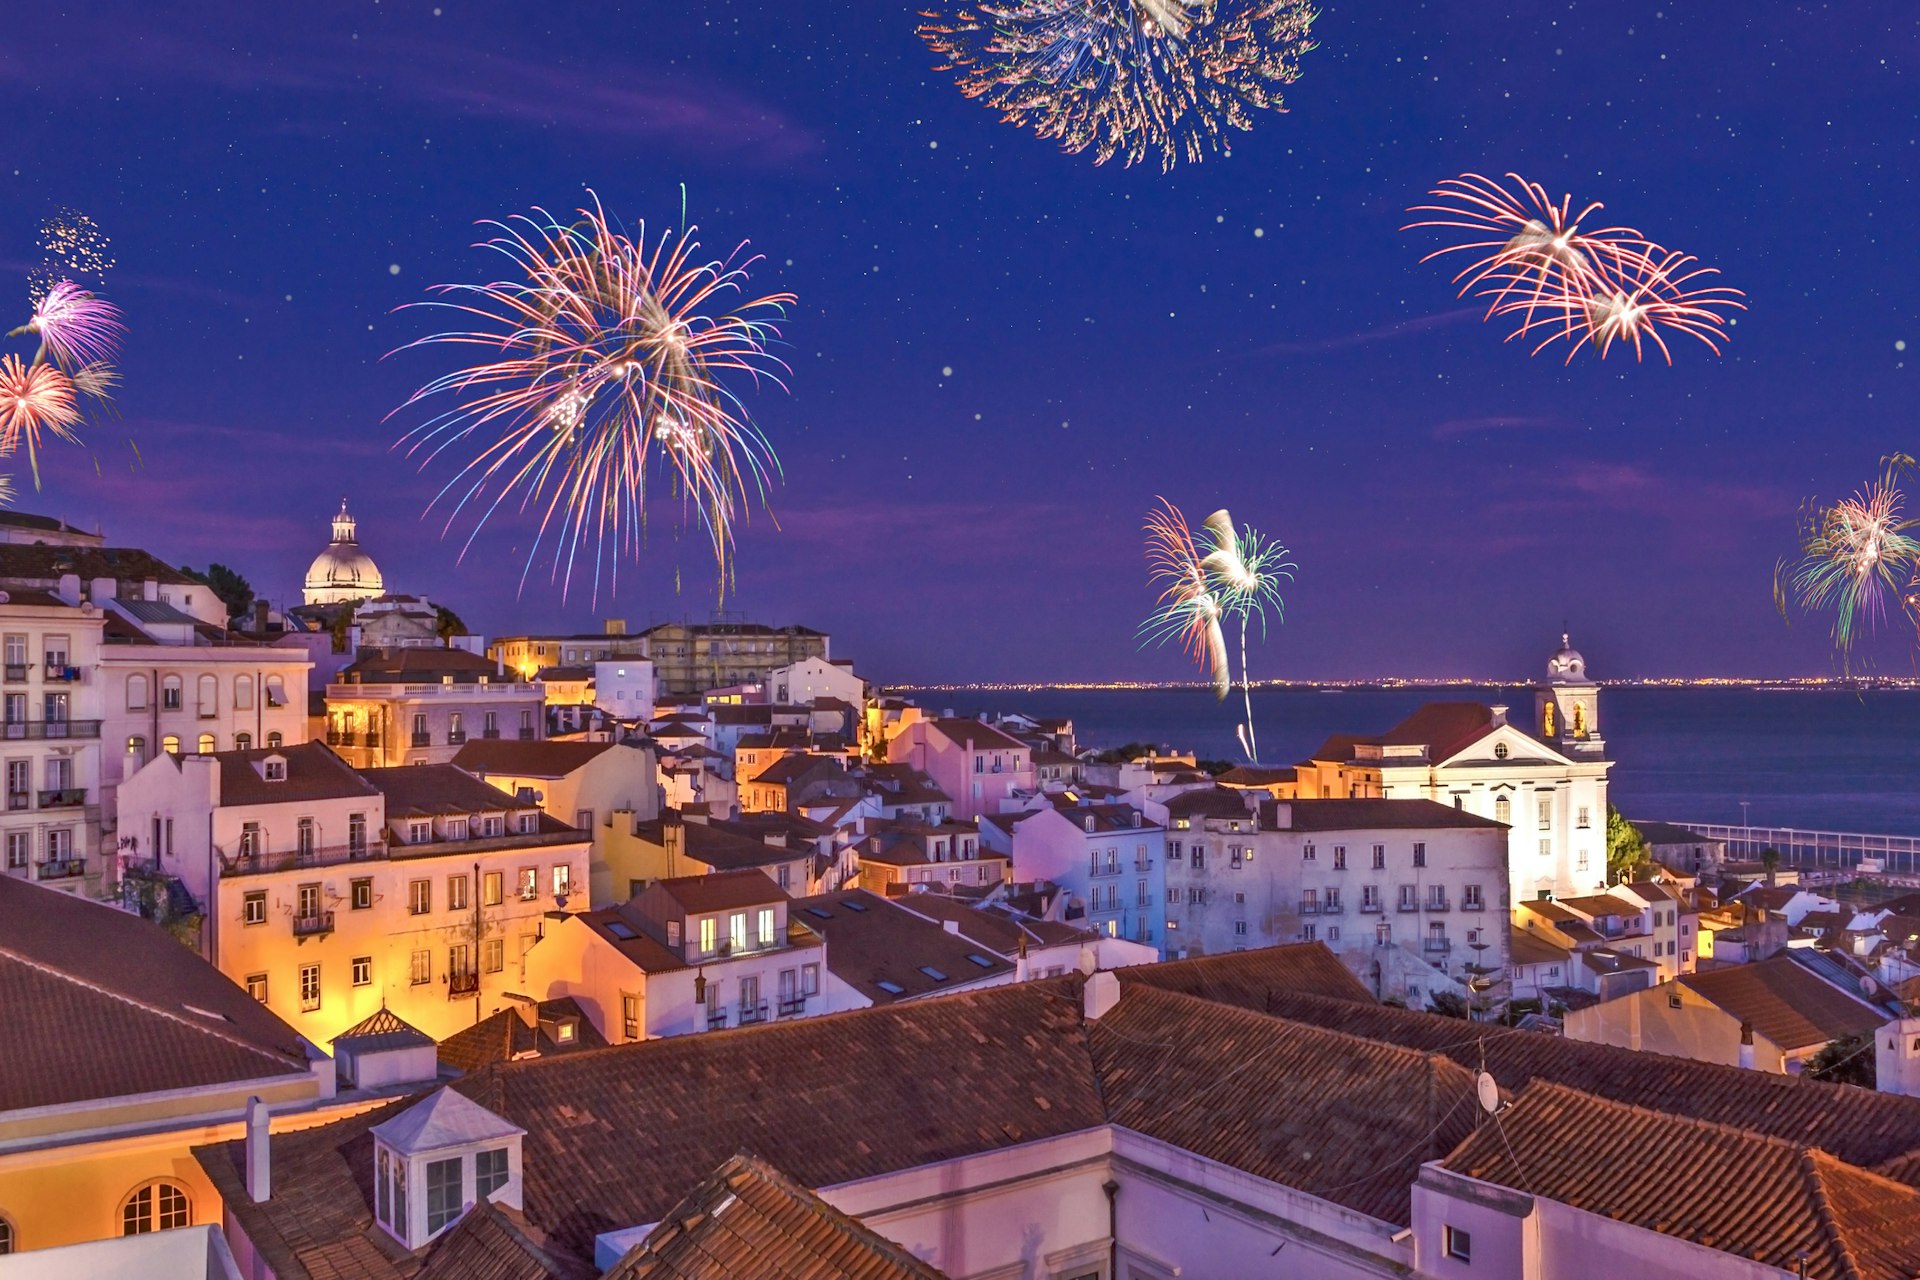 An assembly of fireworks explode above the district of Alfama on New Year's Eve in Lisbon, Portugal